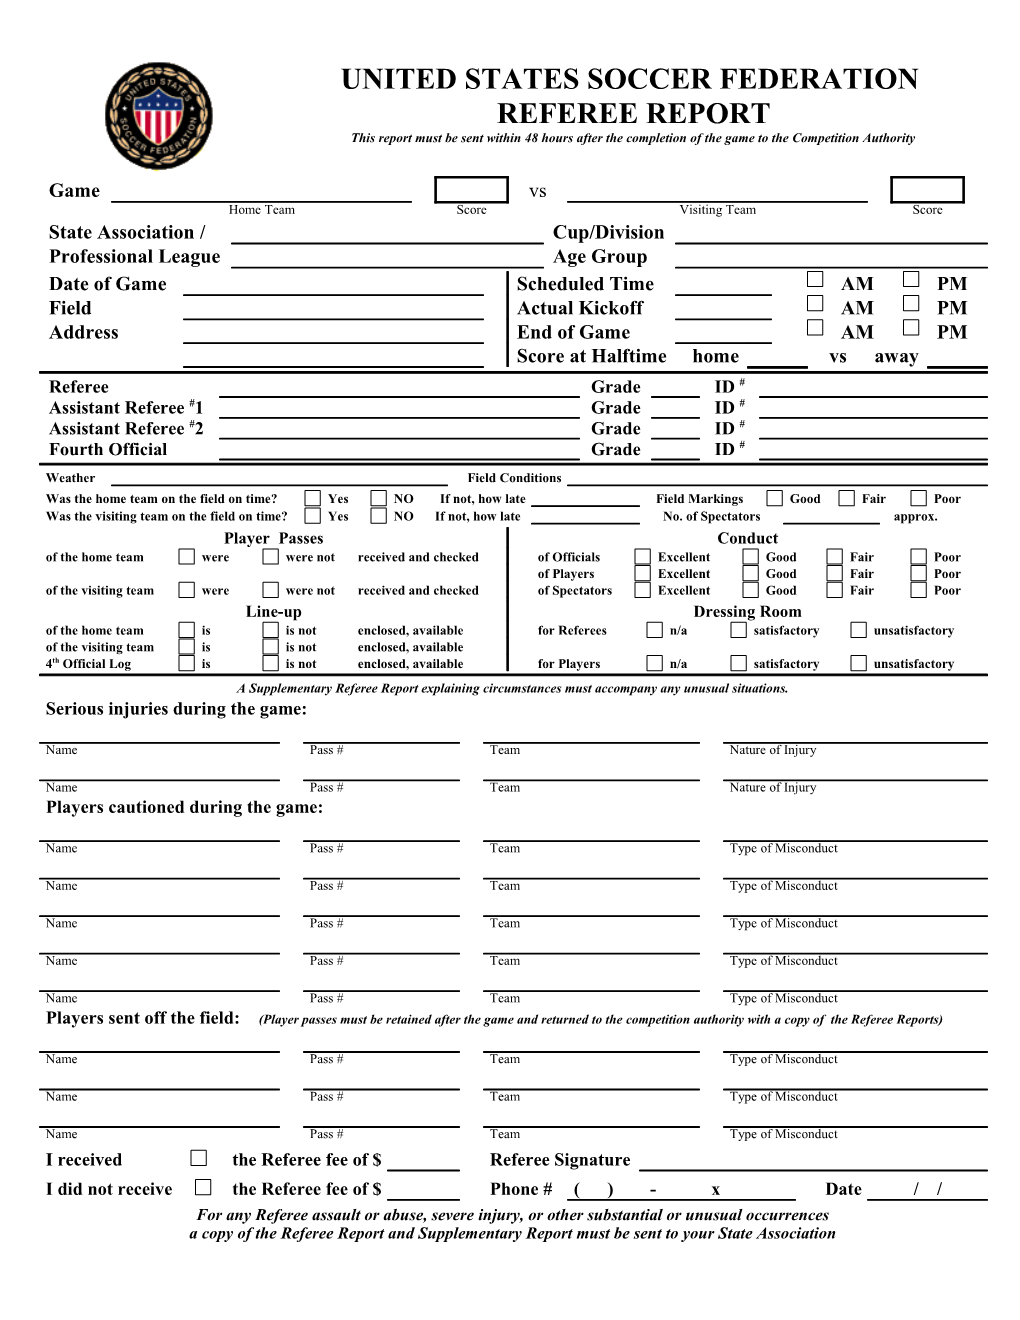 USSF Referee Report